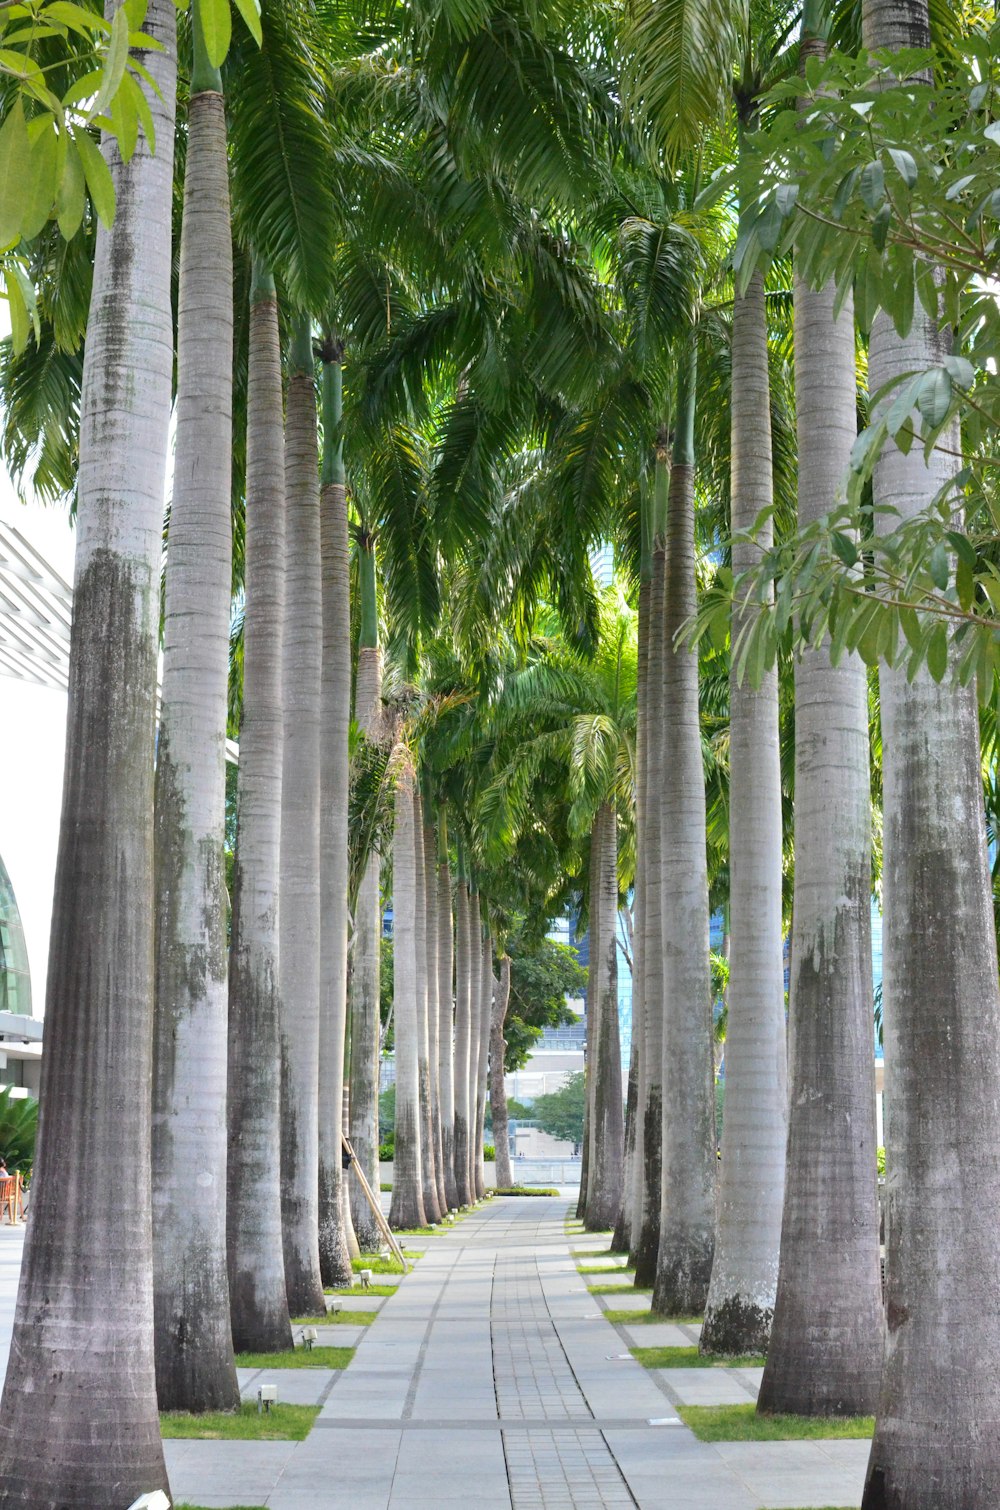 a walkway lined with palm trees next to a sidewalk